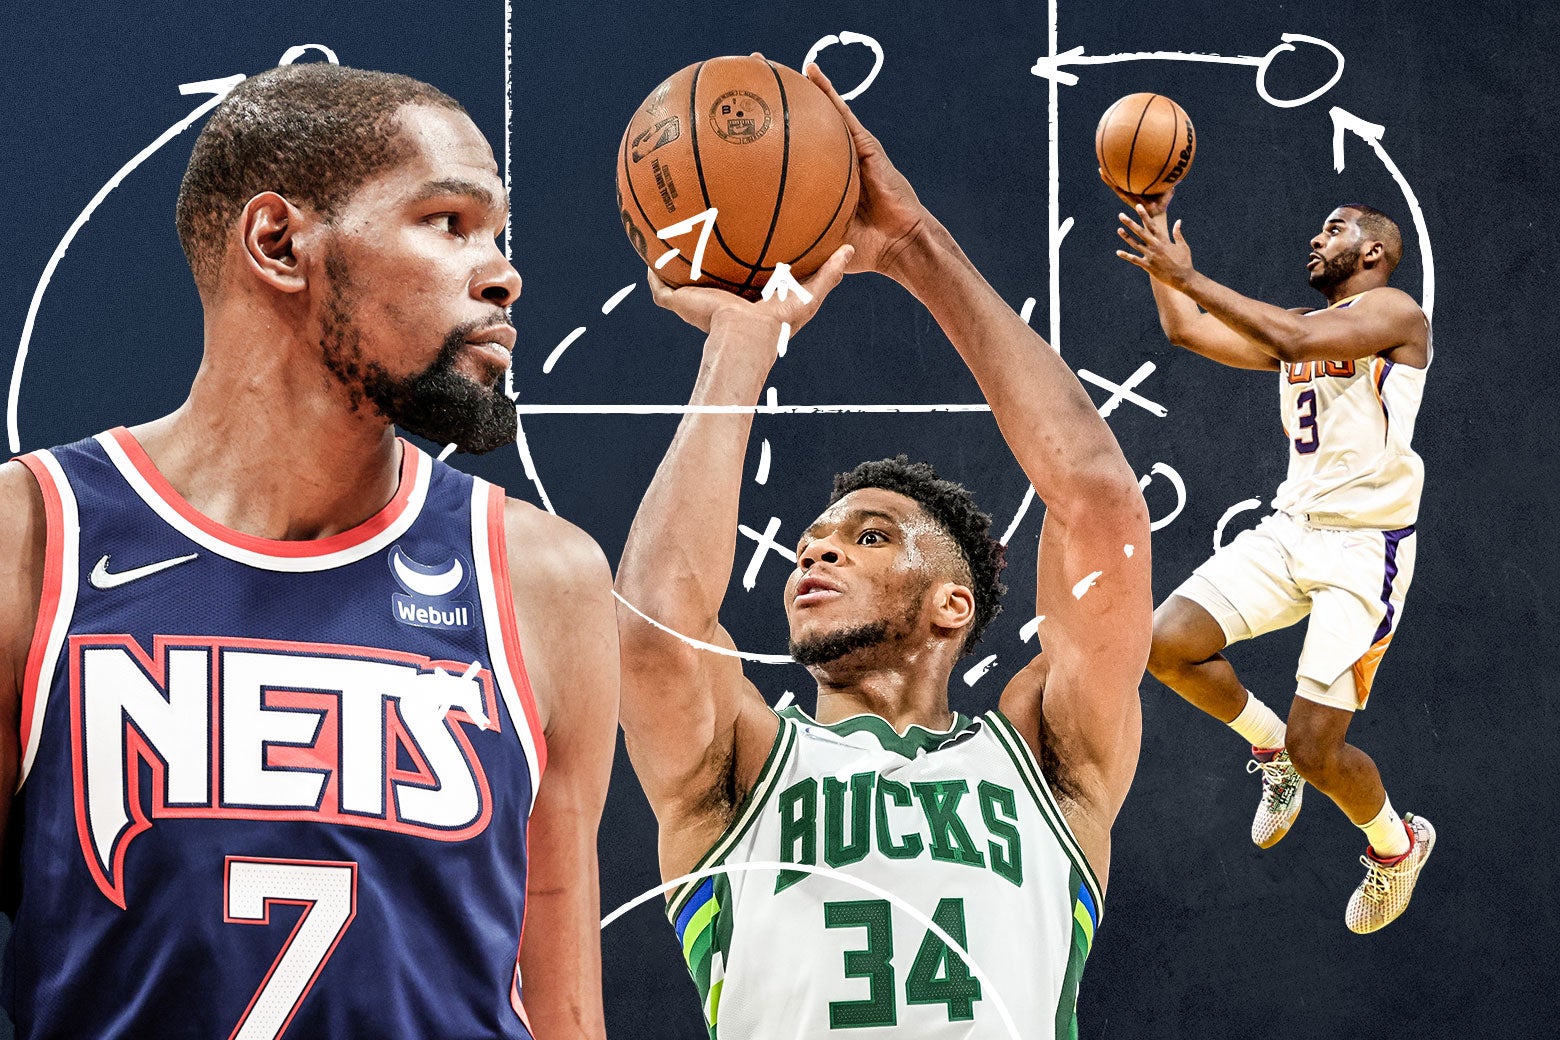 Kevin Durant, Giannis Antetokounmpo, and Chris Paul illustrated with Xes and Os over them. 